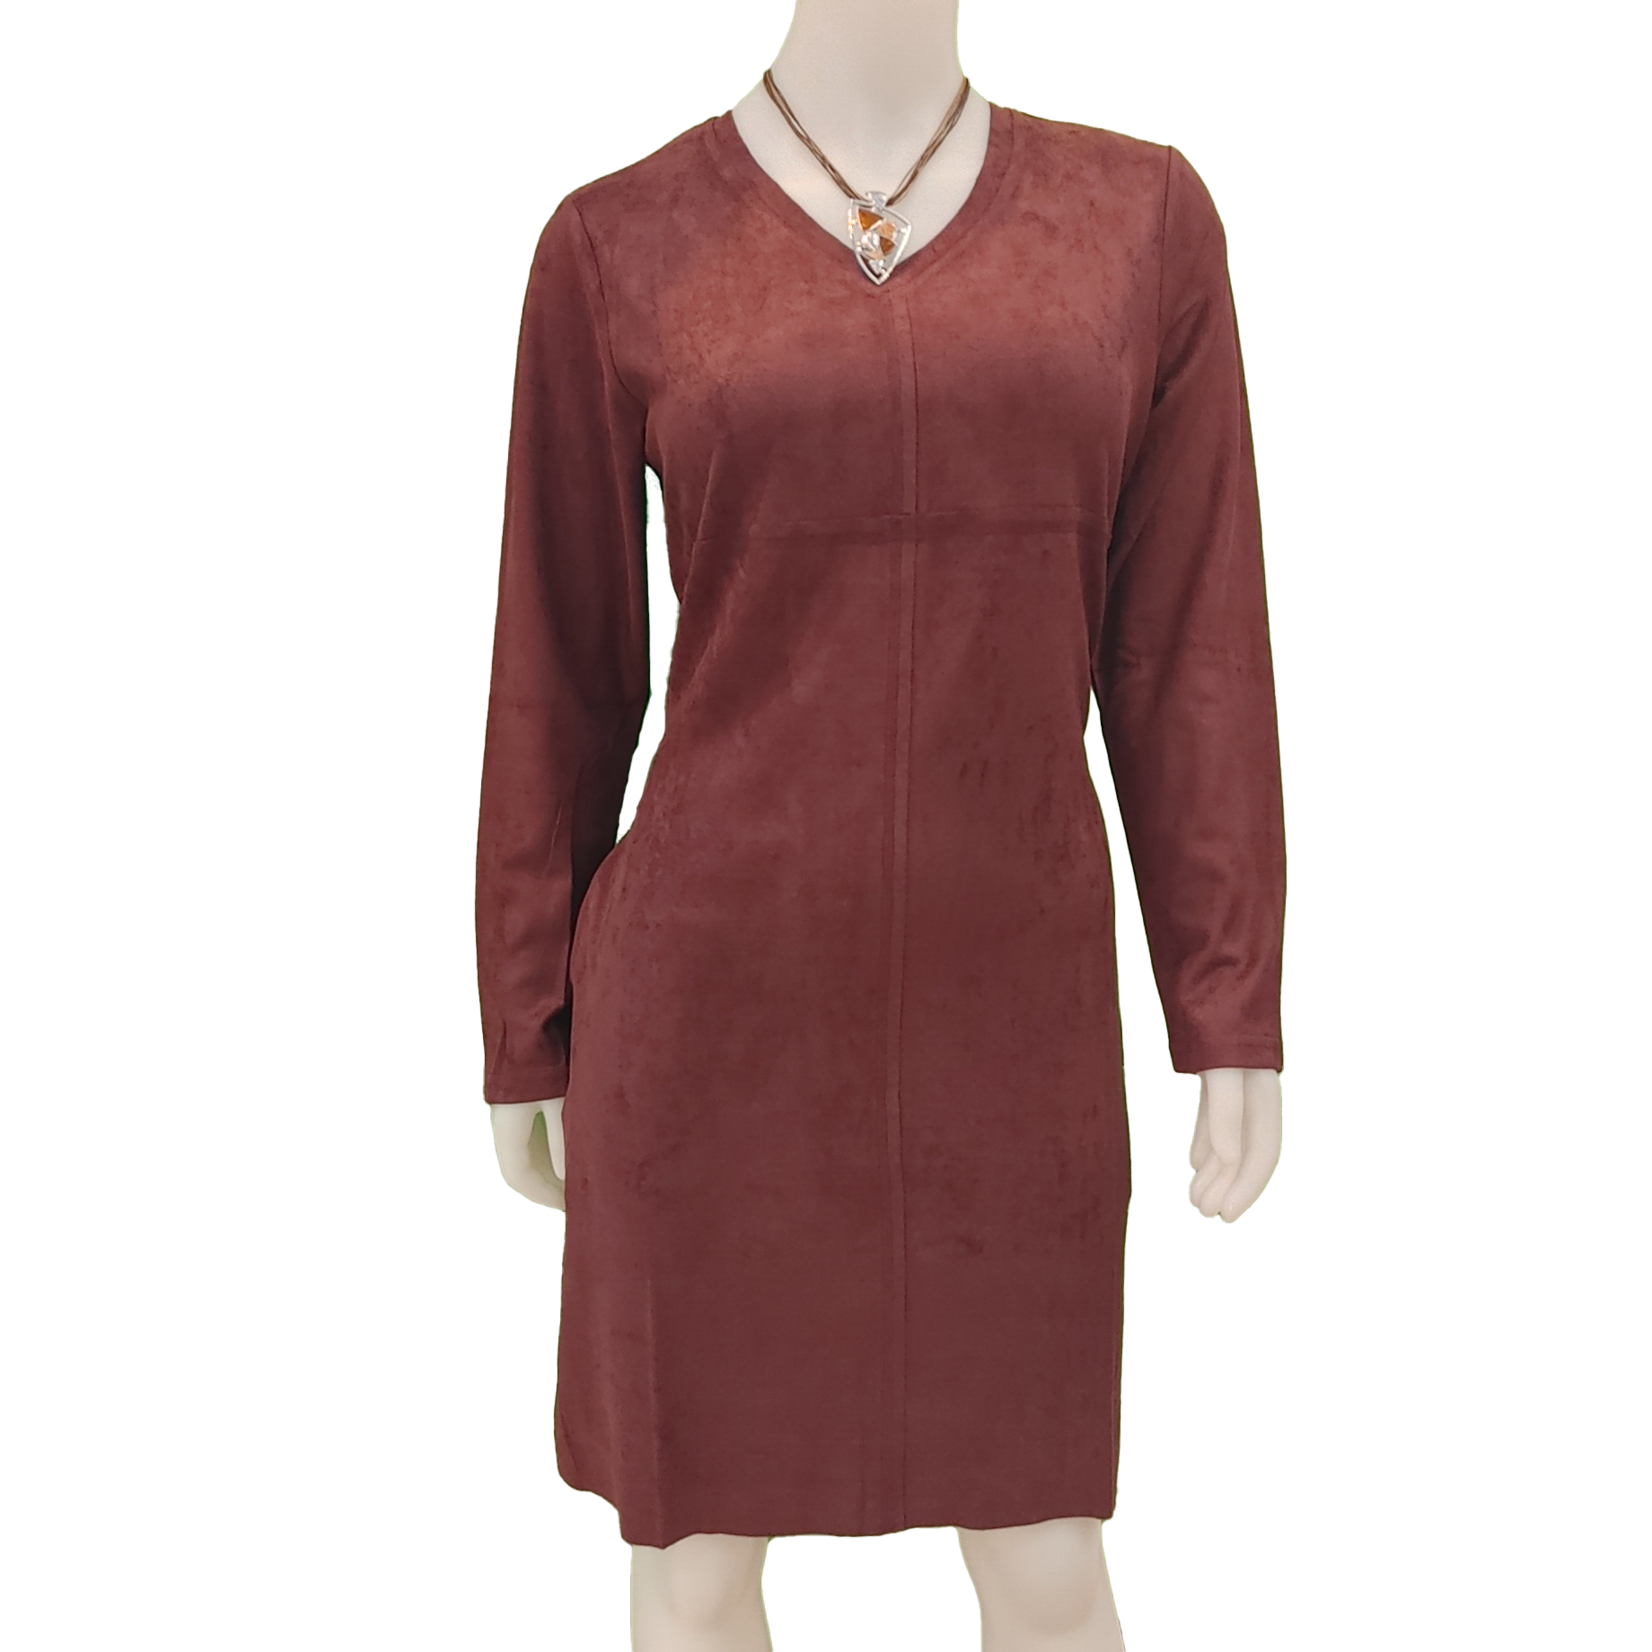 bolide Bolide ladies Long sleeve v-neck faux suede woven dress with pockets